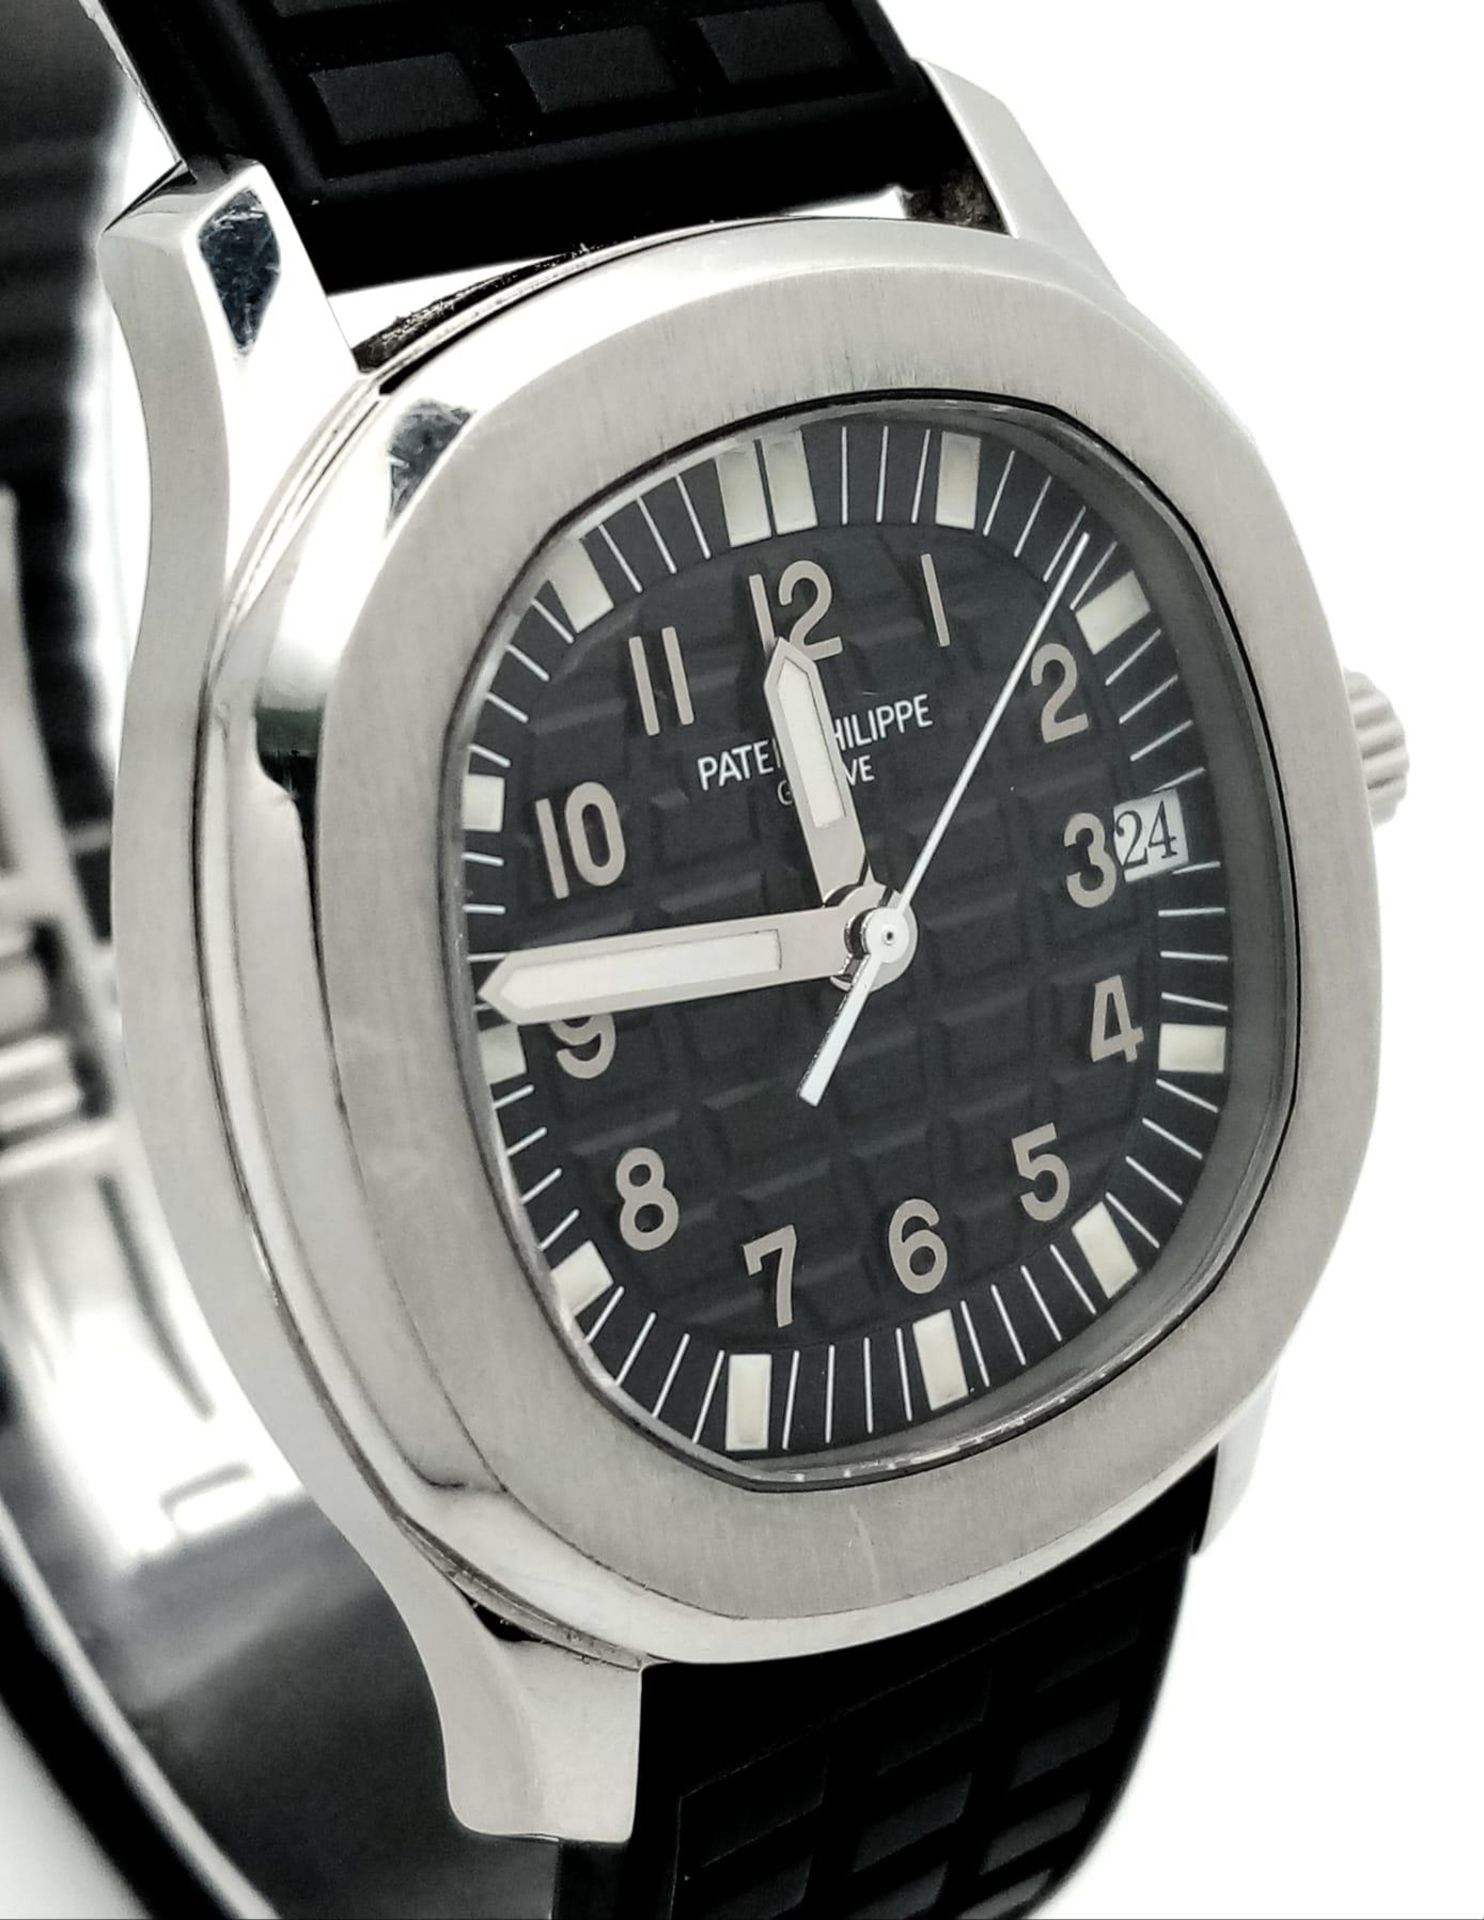 A Patek Phillippe Aquanaut Watch. Textured black rubber strap. Stainless steel case - 36mm. - Image 3 of 8